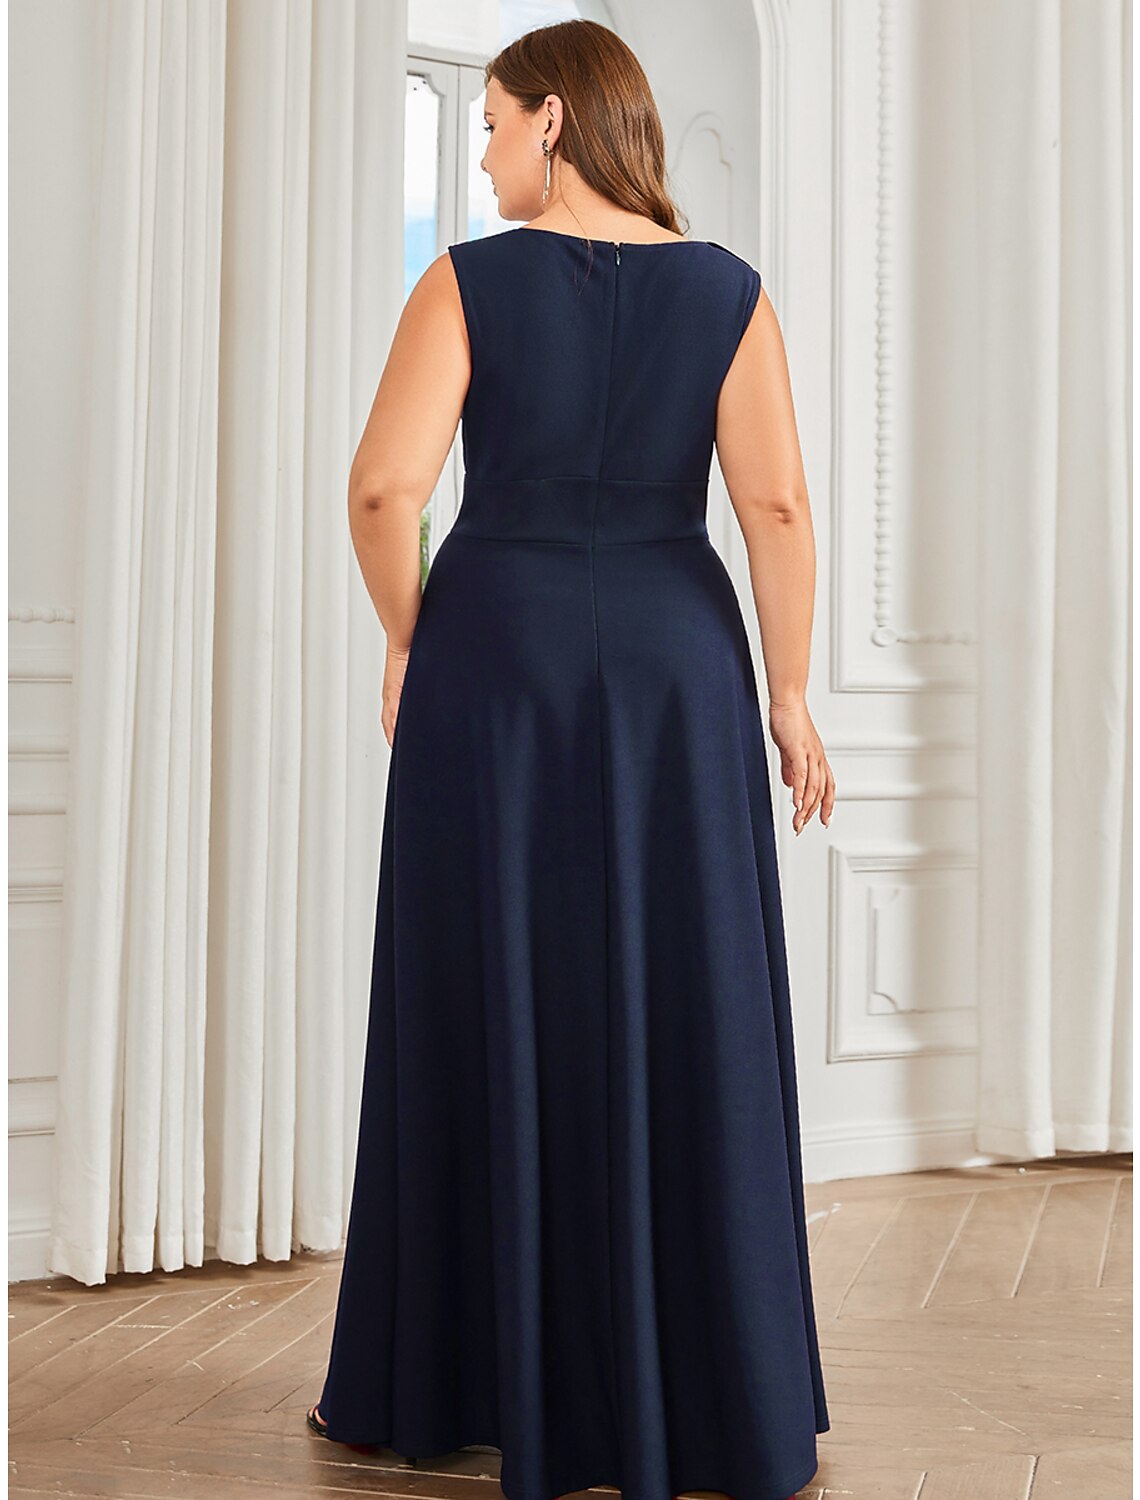 A-Line Evening Gown Plus Size Dress Formal Floor Length Sleeveless Jewel Neck Polyester with Draping Appliques